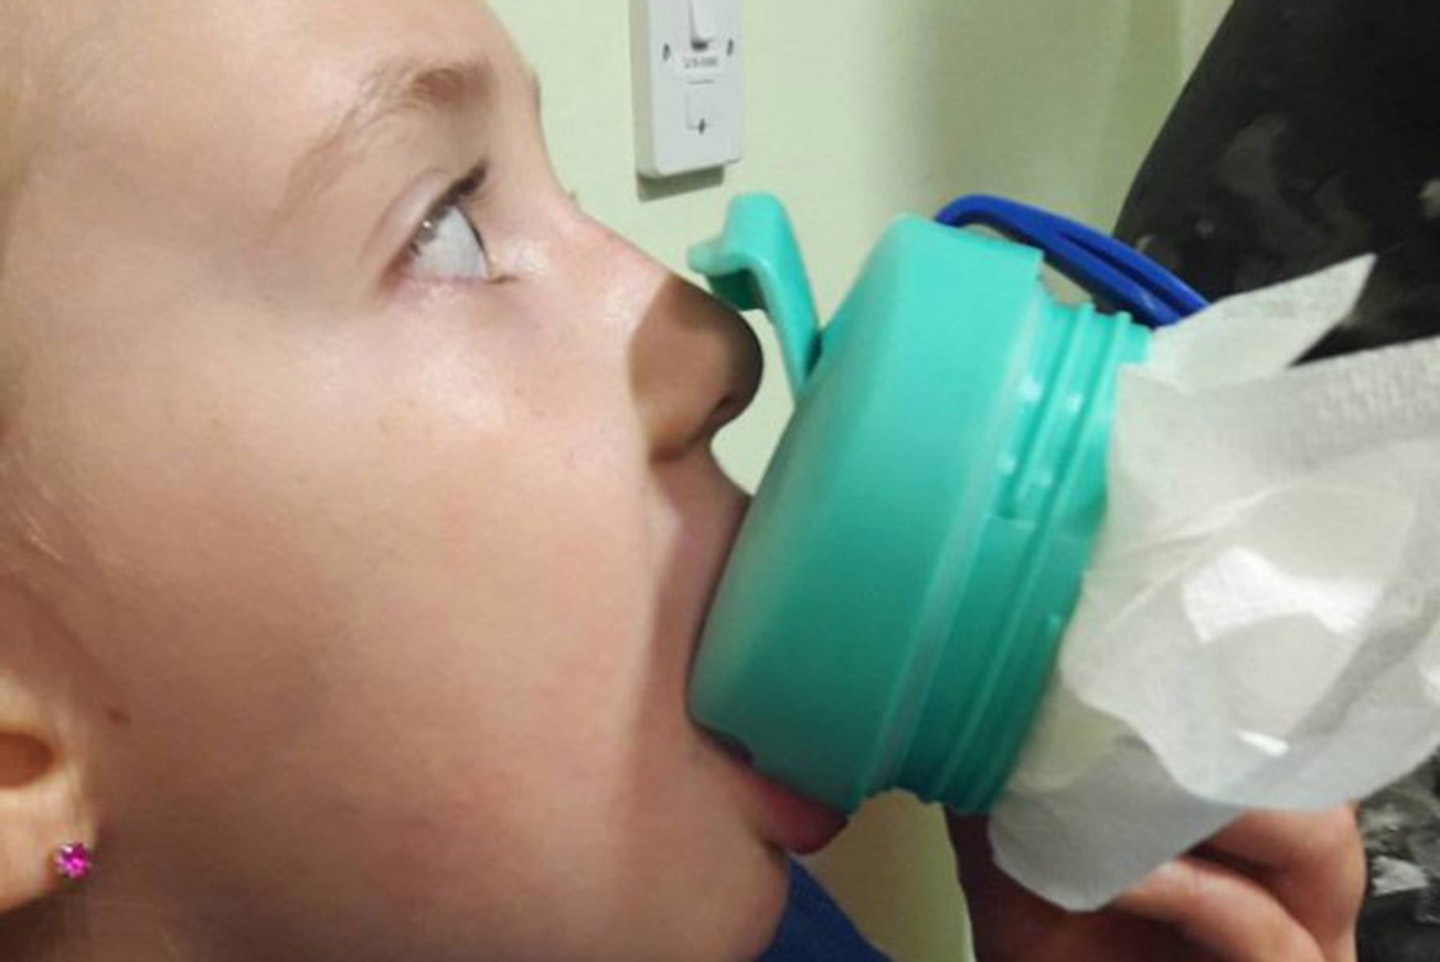 7-year-old-girl-megan-donald-natalie-rushed-hospital-tongue-trapped-disney-cup